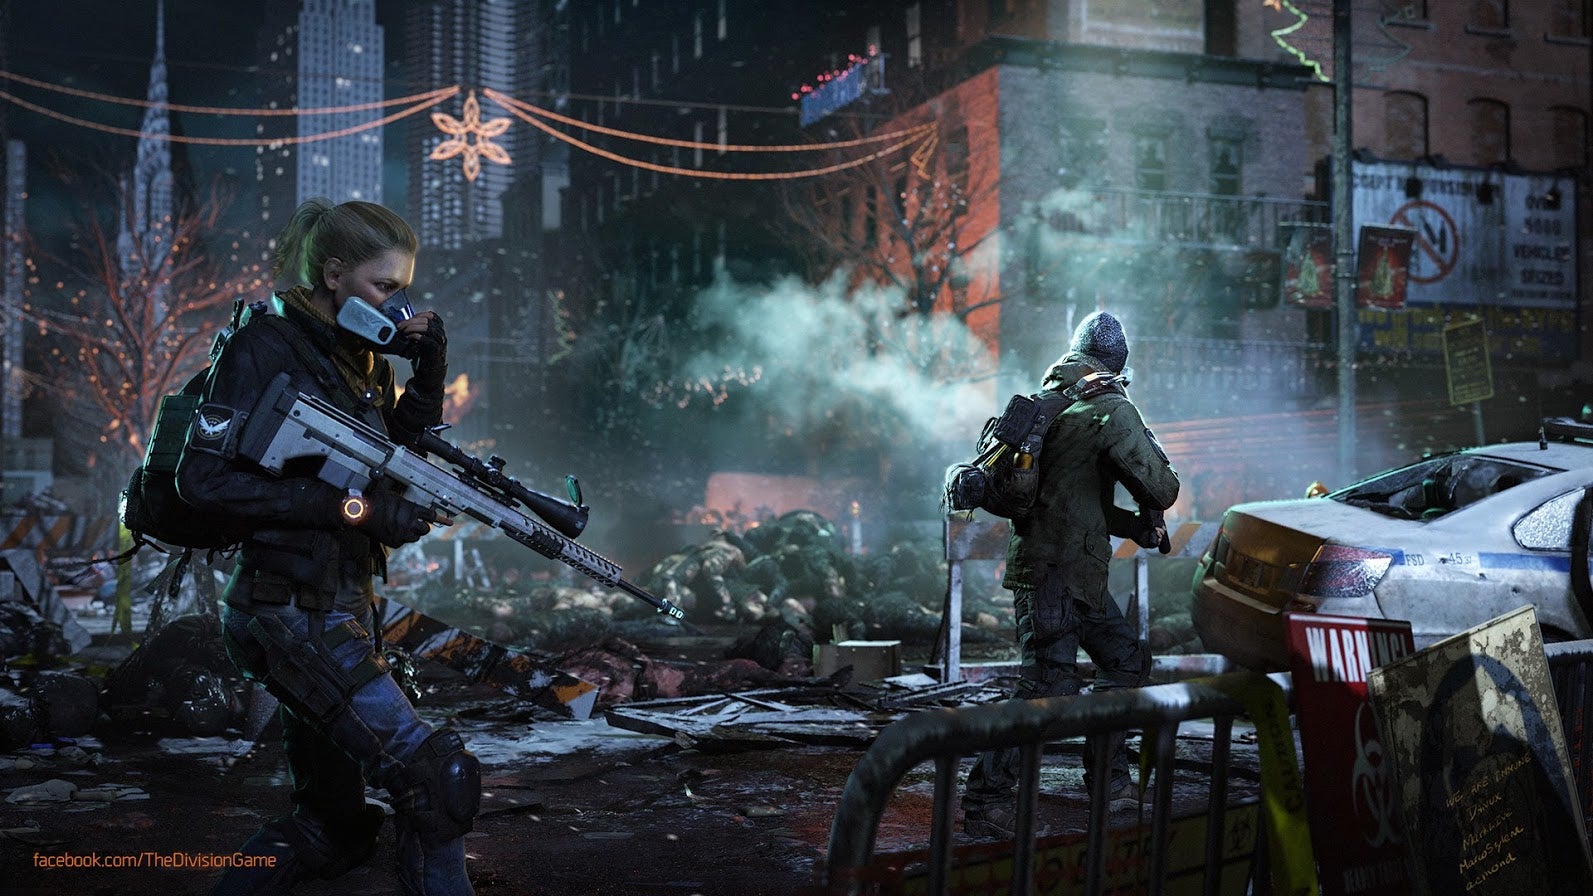 Image for The Division gets another lone screenshot